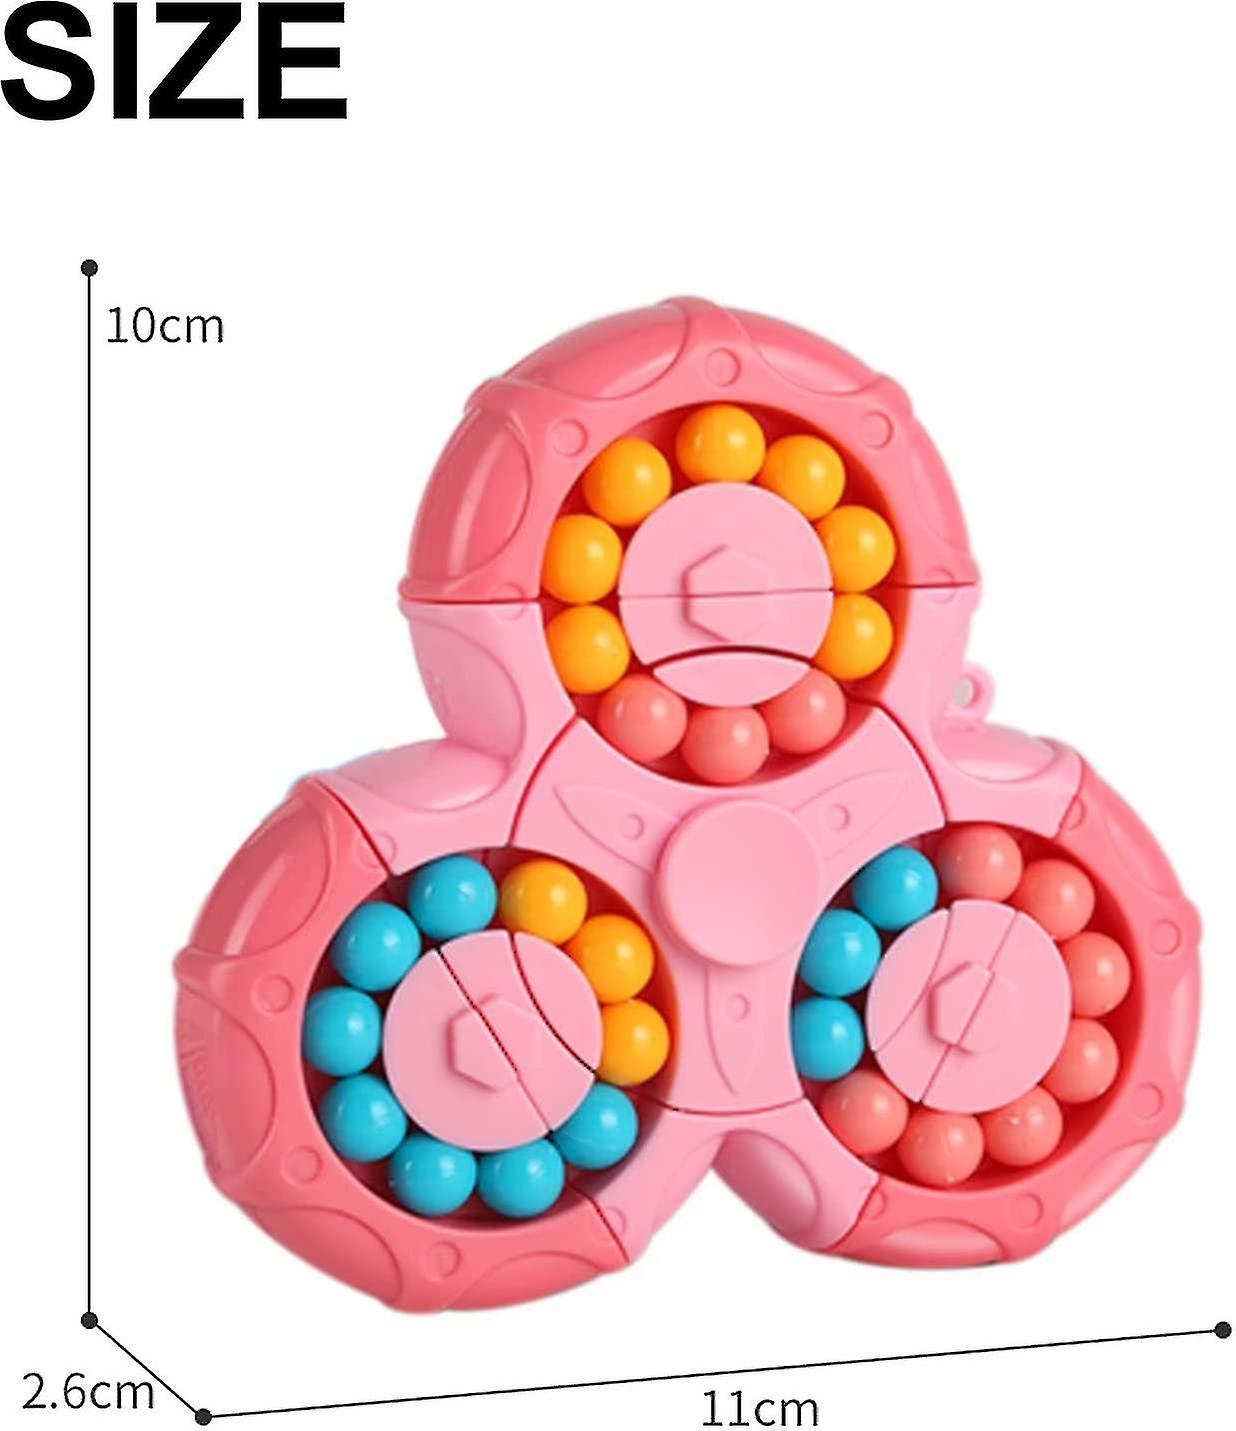 Puzzle Fidget Spinner Ball Sorting Puzzle Brain Training Games Infinity Cube Spinning Toy